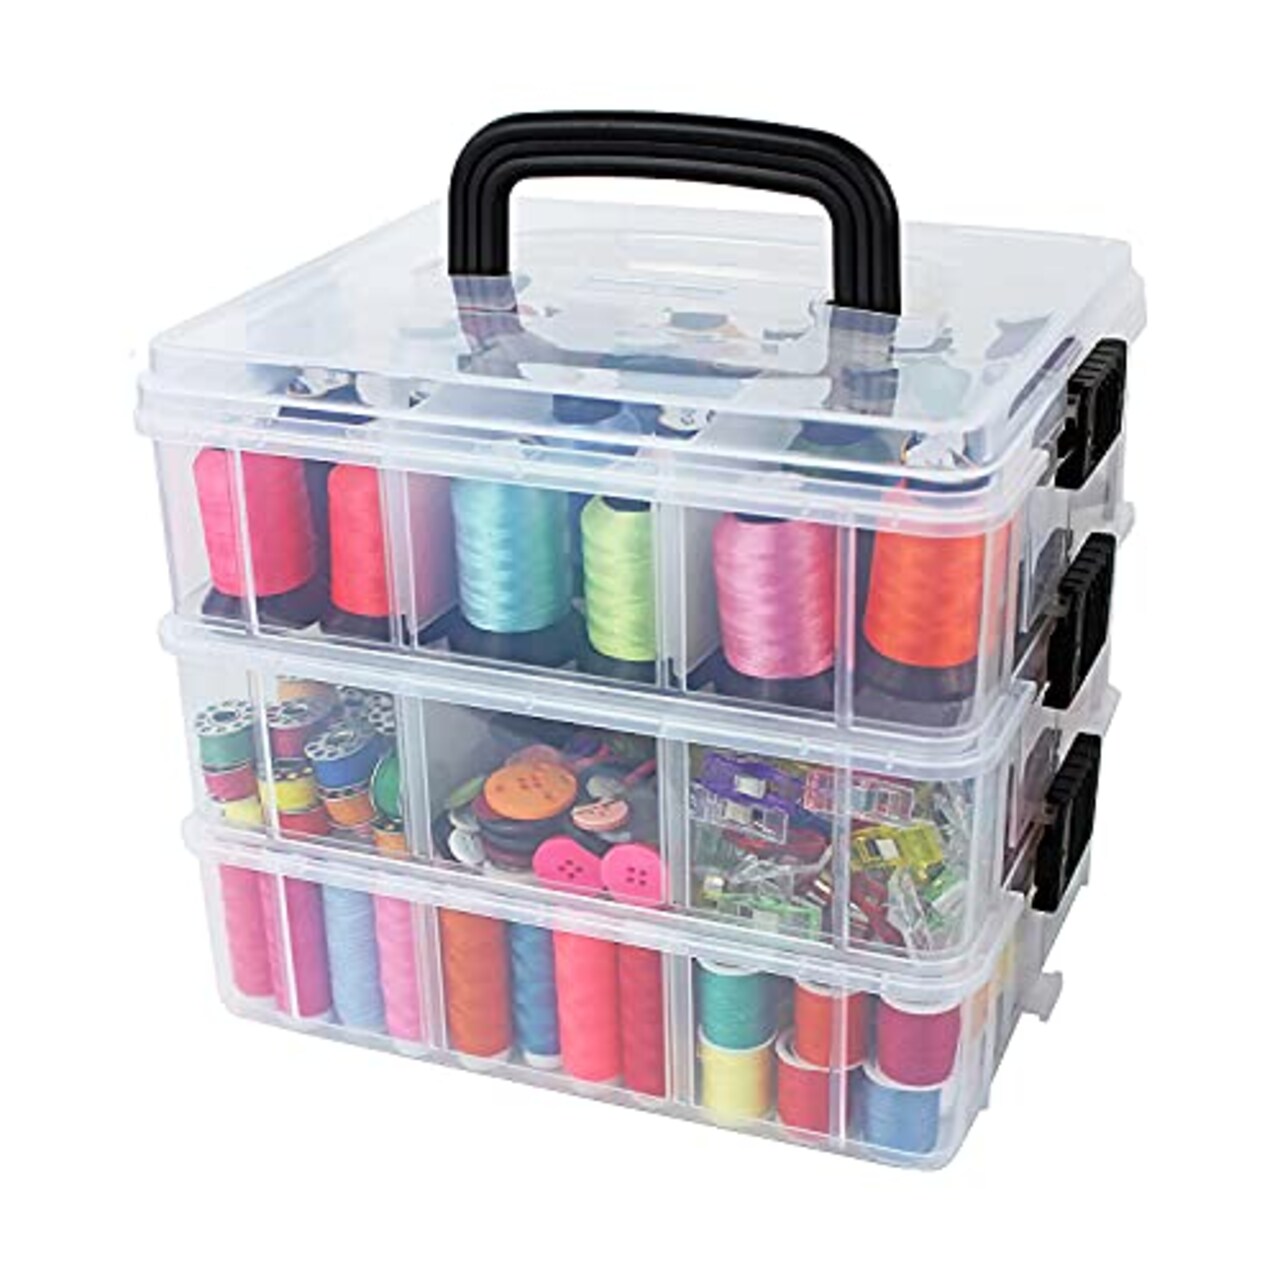 Bins & Things Stackable Storage Container with 18 Adjustable Compartments -  Clear - Sewing Box & Craft Storage /